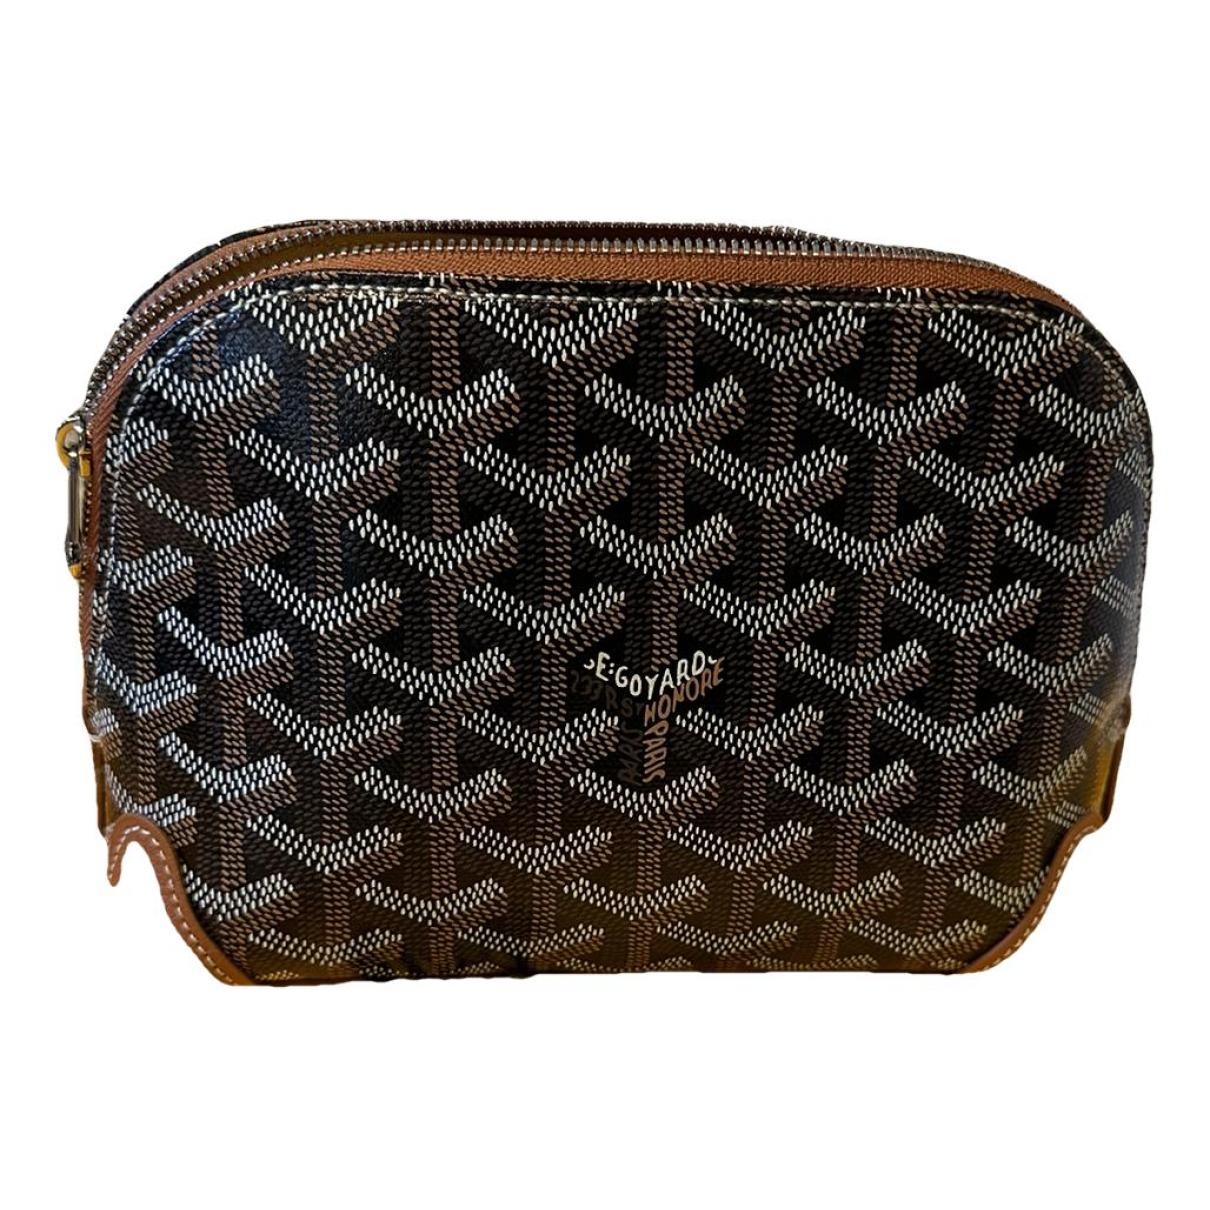 Goyard Travel bag for women  Buy or Sell your Designer bags - Vestiaire  Collective